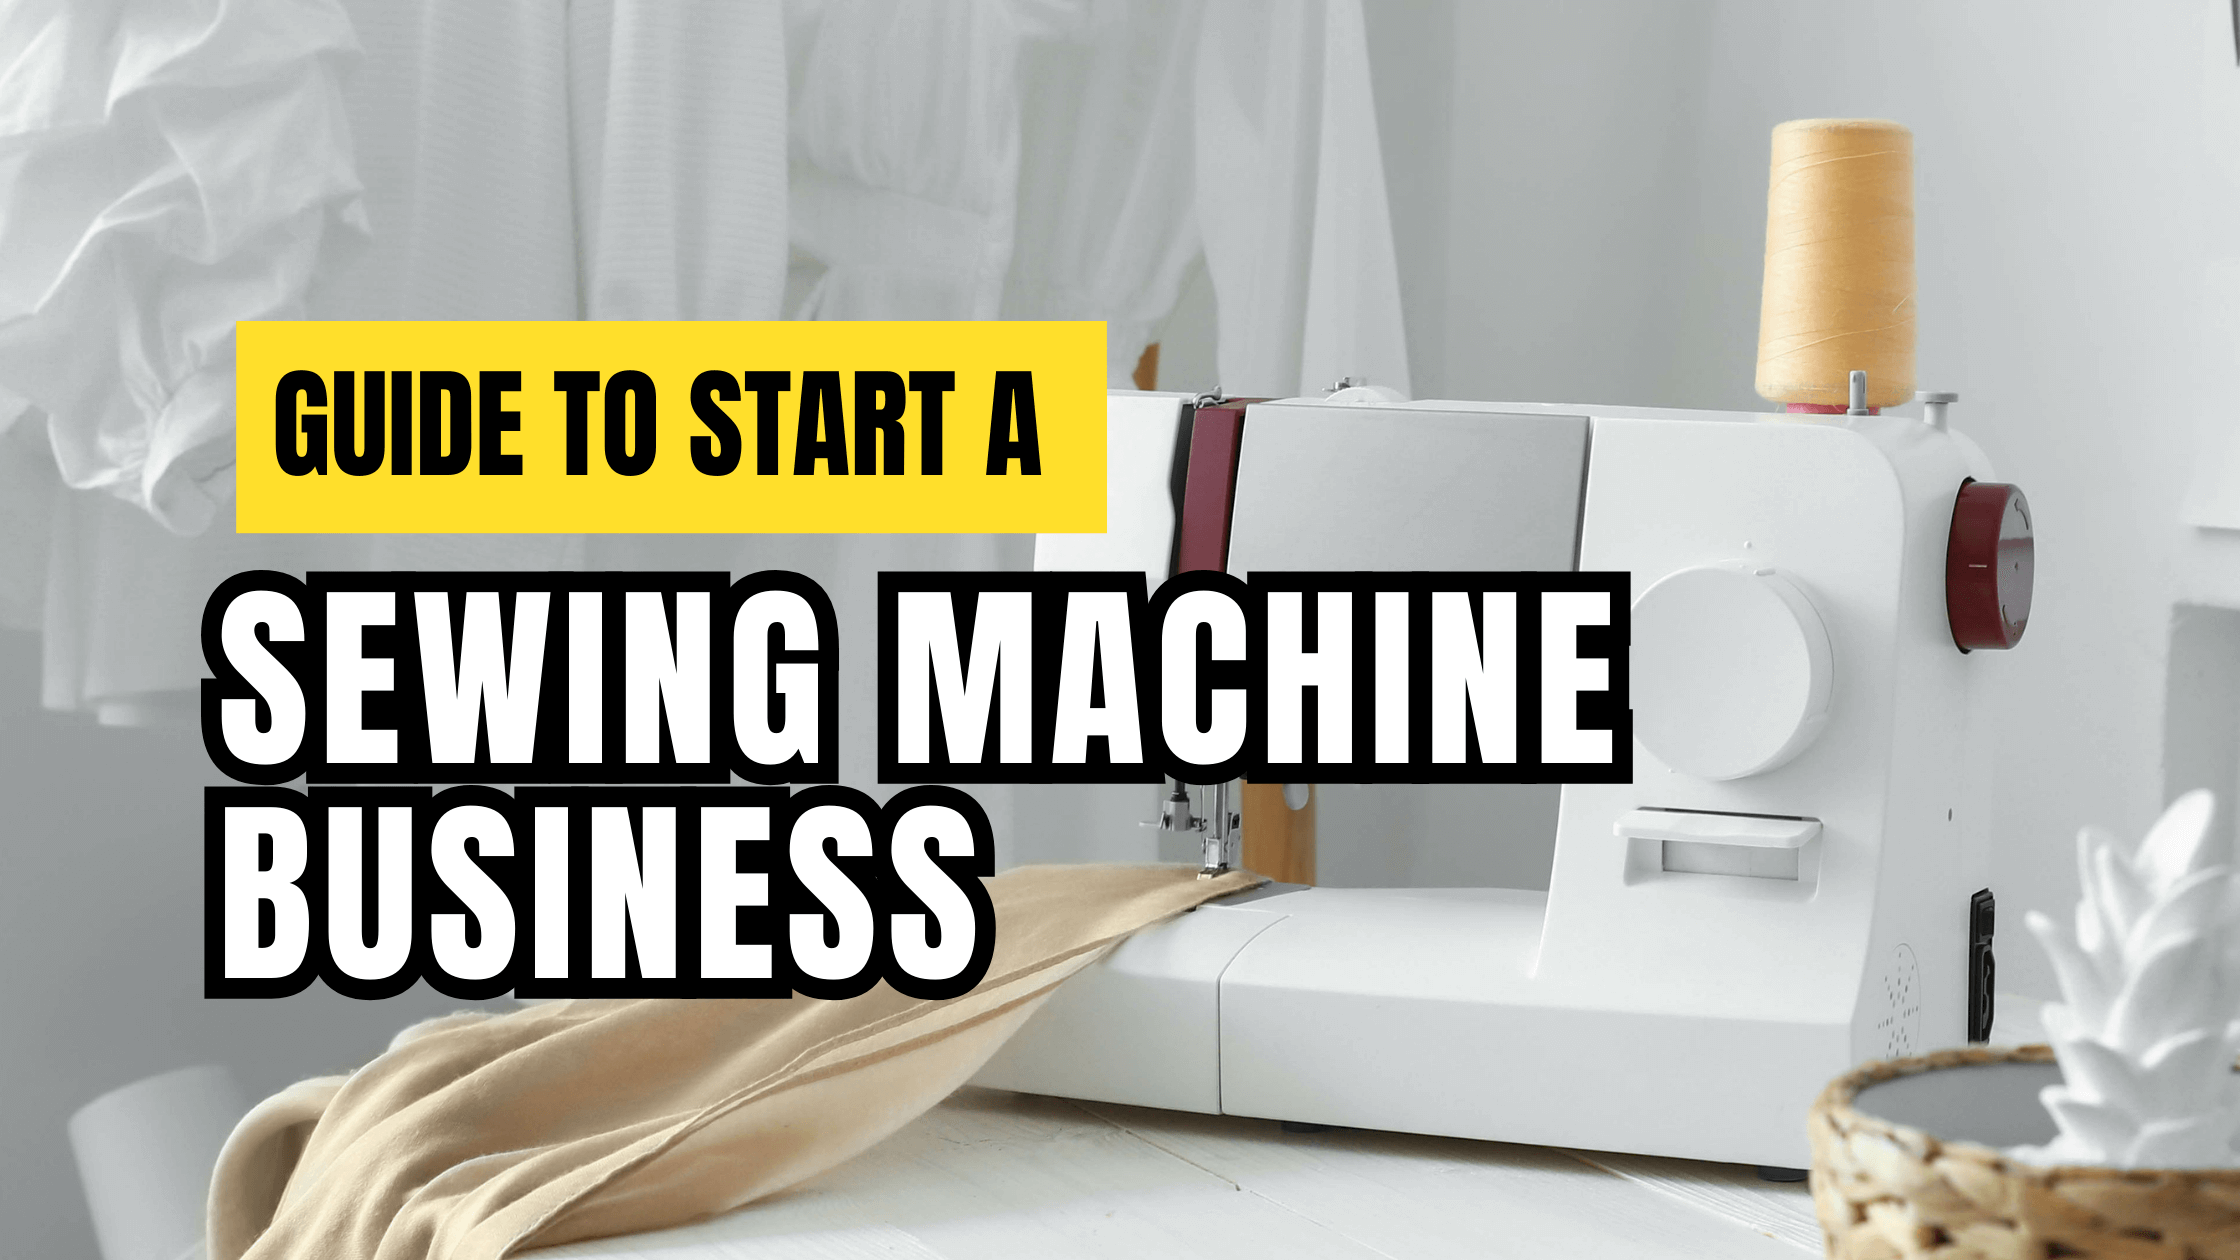 Essential Guide to Starting a Small Sewing Business with a Sewing Machine